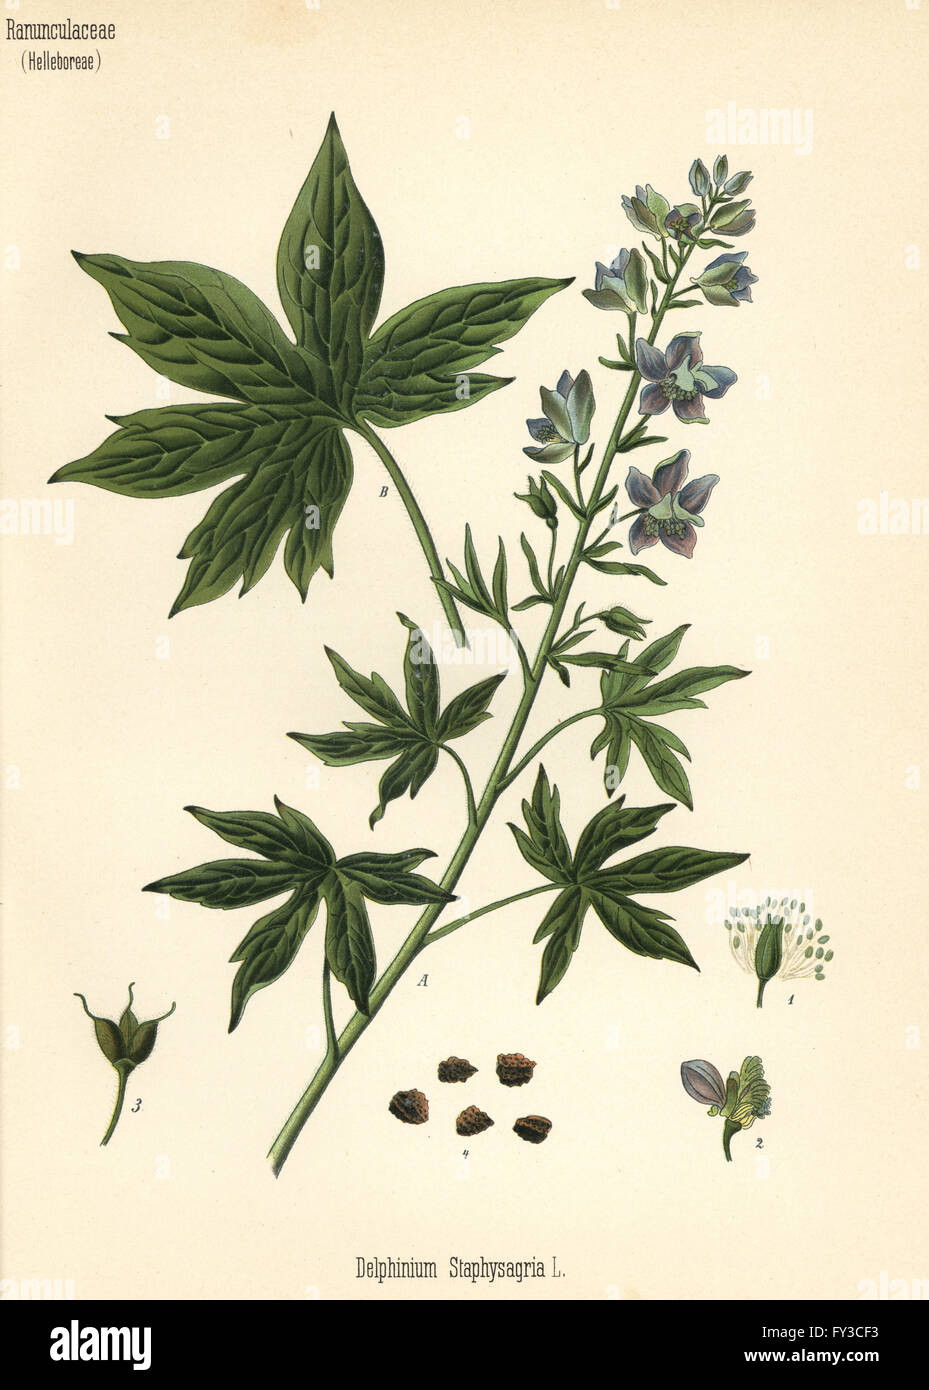 Lice-bane or stavesacre, Delphinium staphisagria. Chromolithograph after a botanical illustration from Hermann Adolph Koehler's Medicinal Plants, edited by Gustav Pabst, Koehler, Germany, 1887. Stock Photo